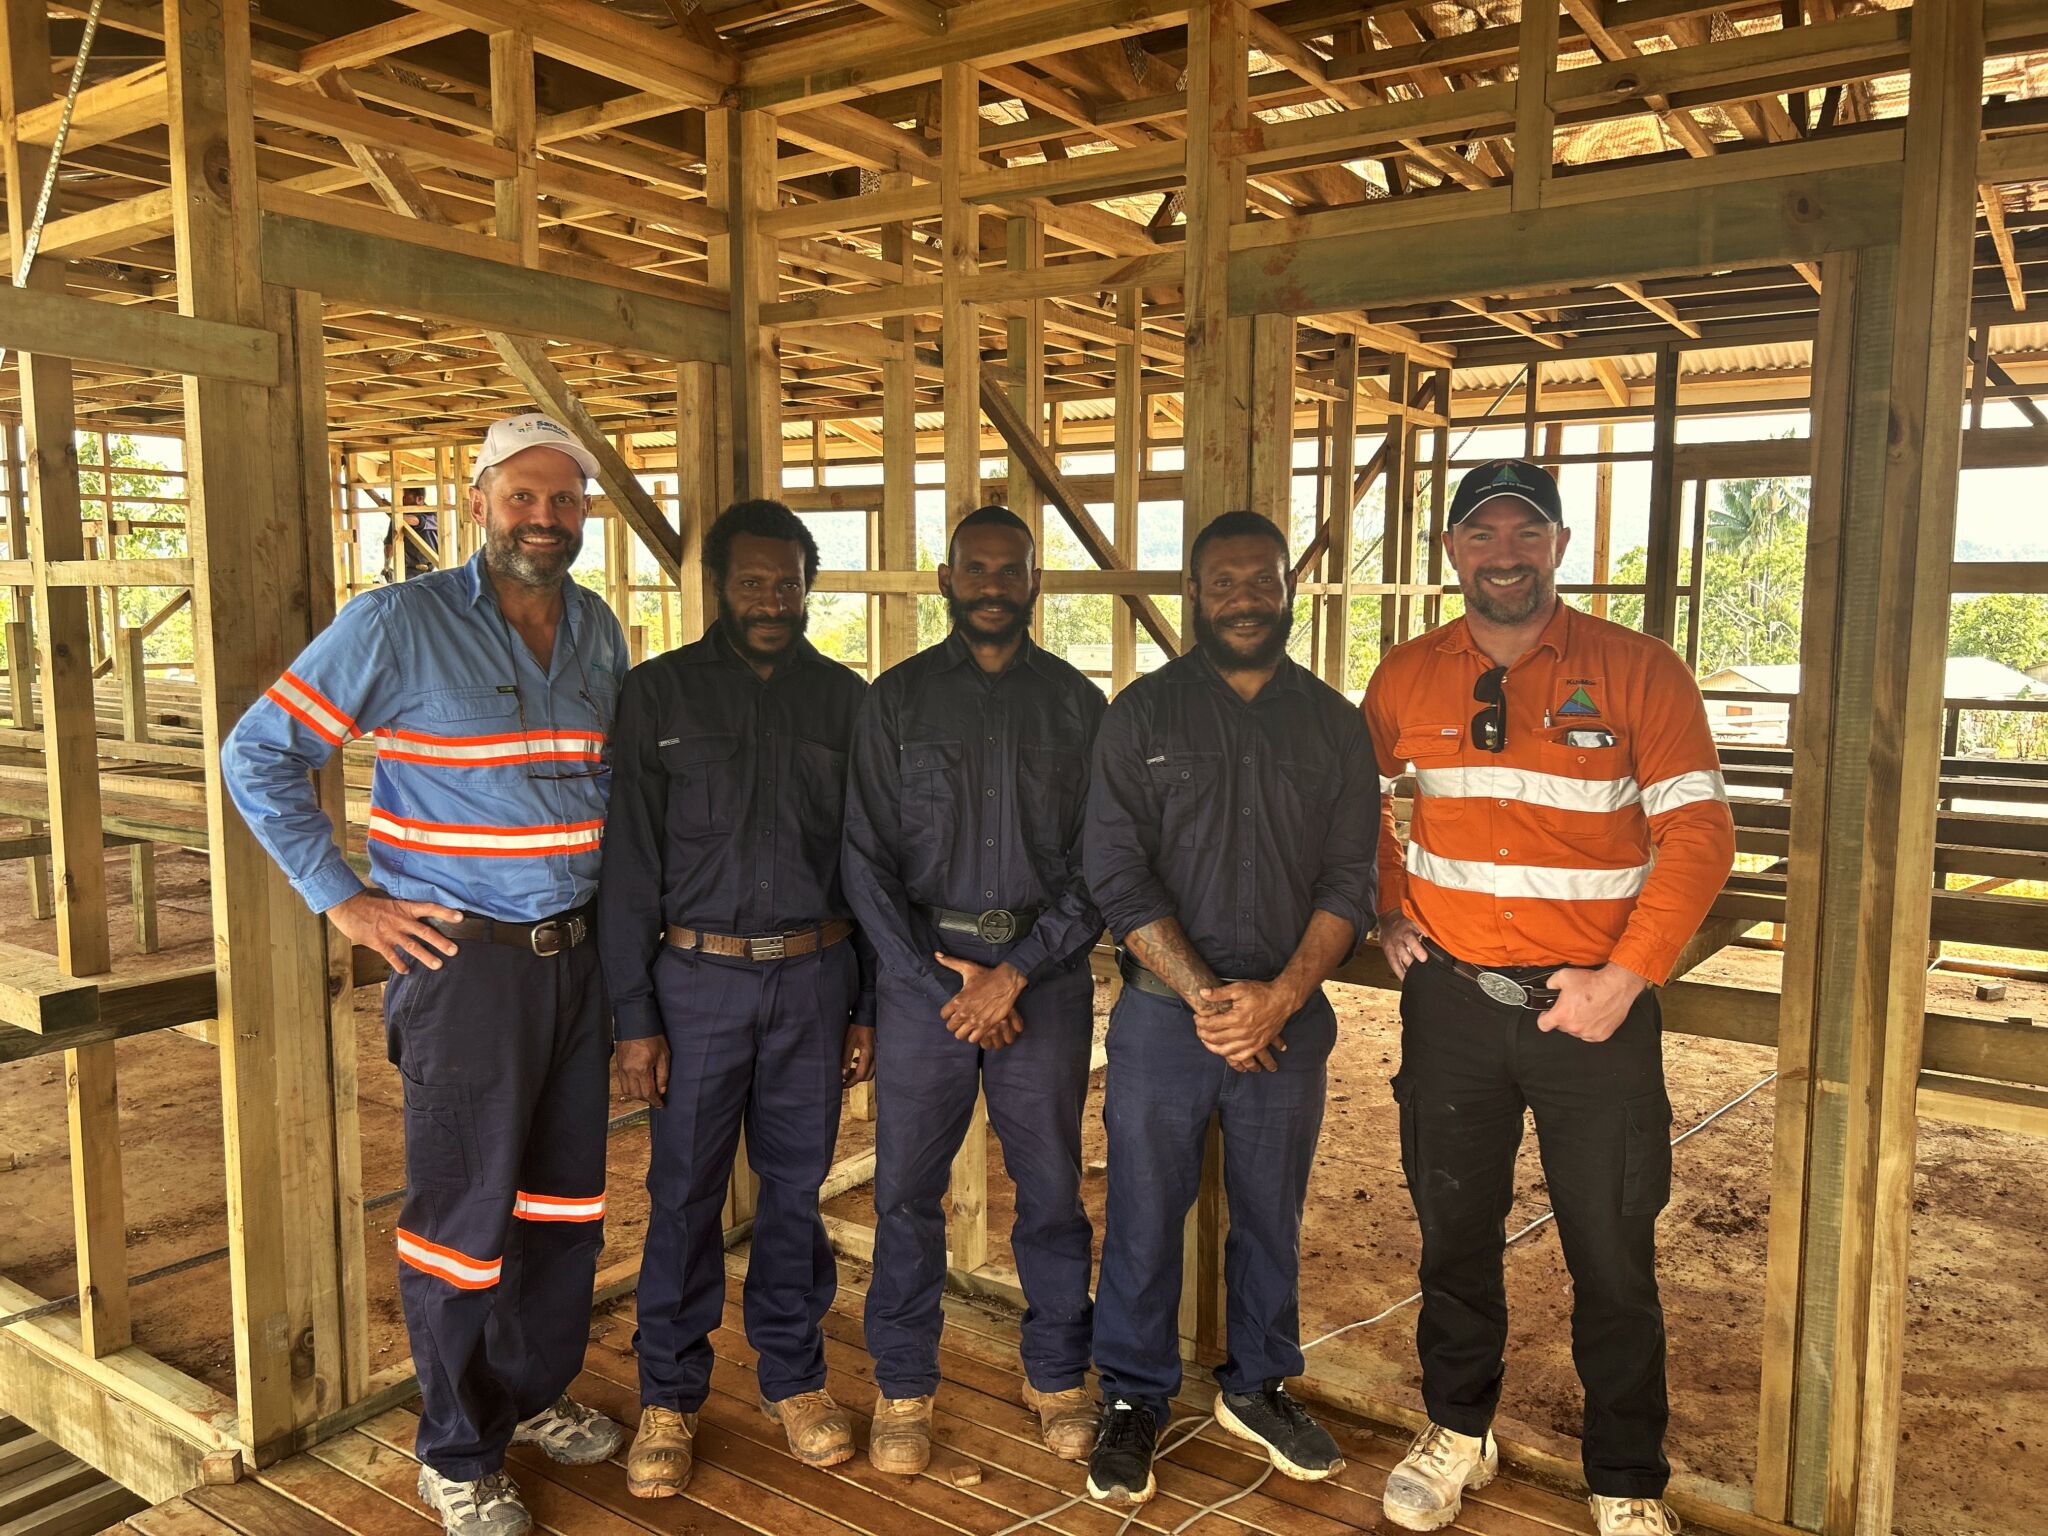 Pigma teachers in tradesmen uniforms posing for the picture